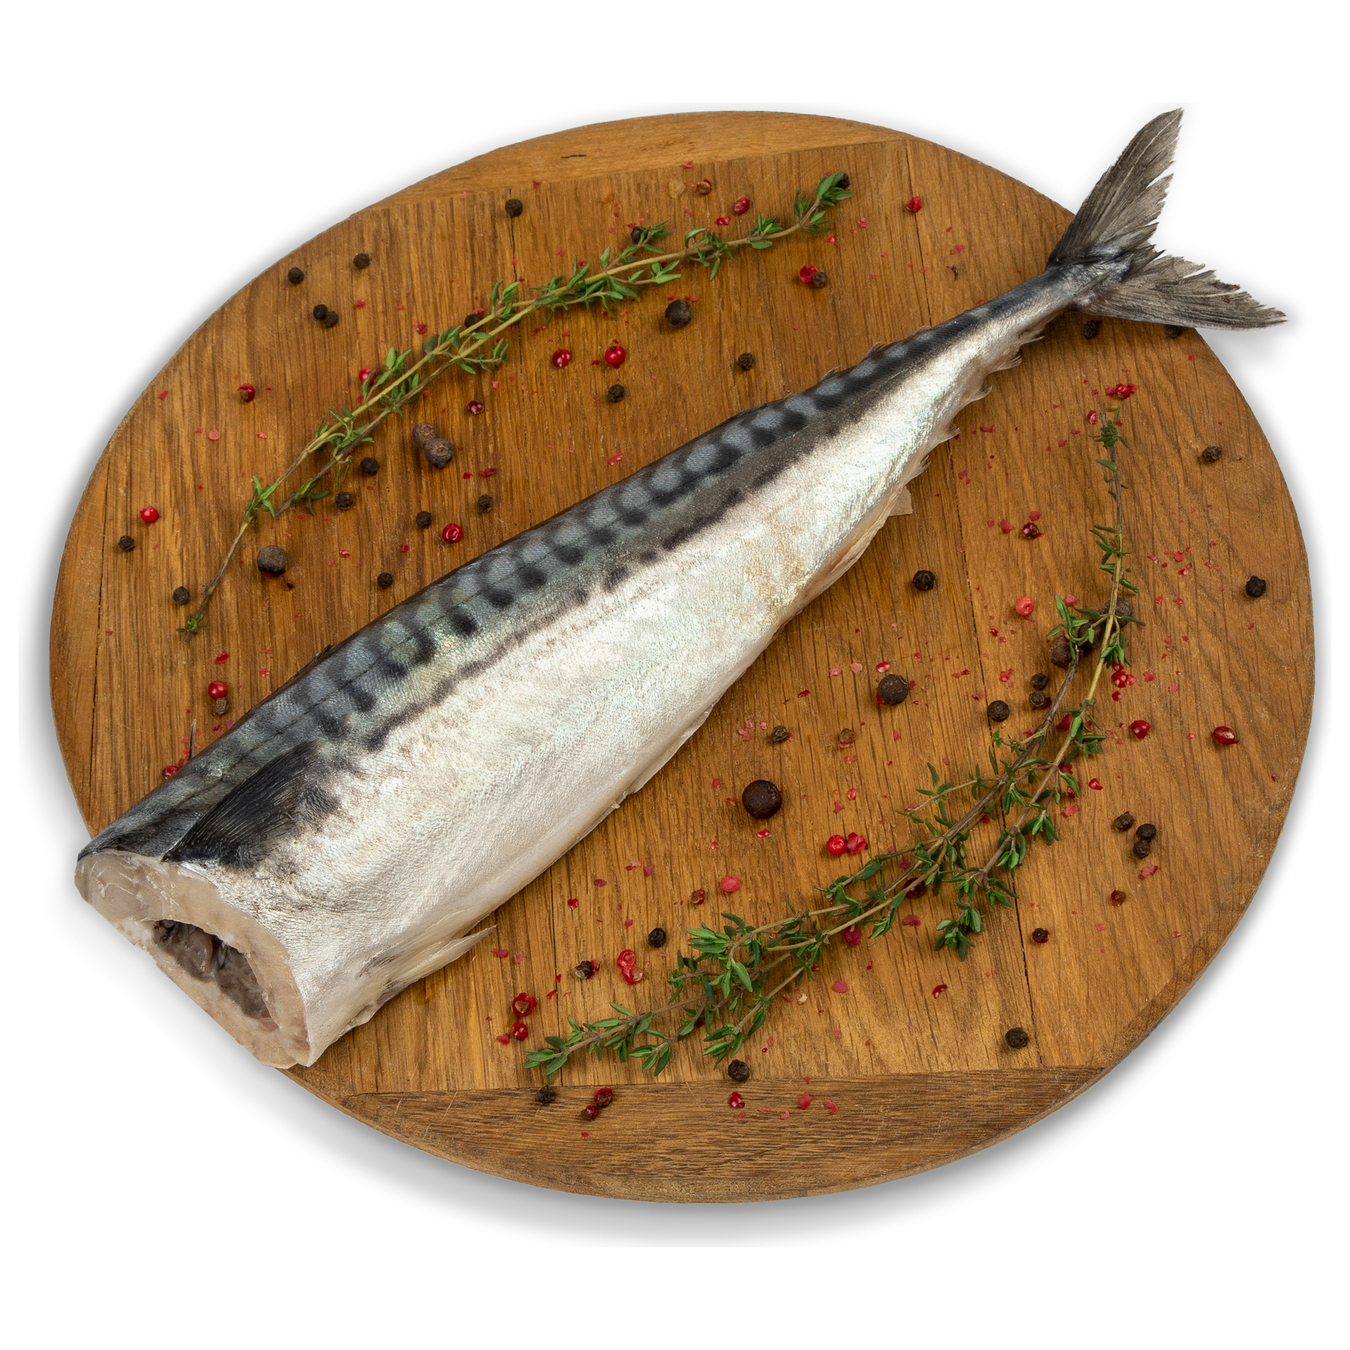 Patrana mackerel without a head is slightly salted